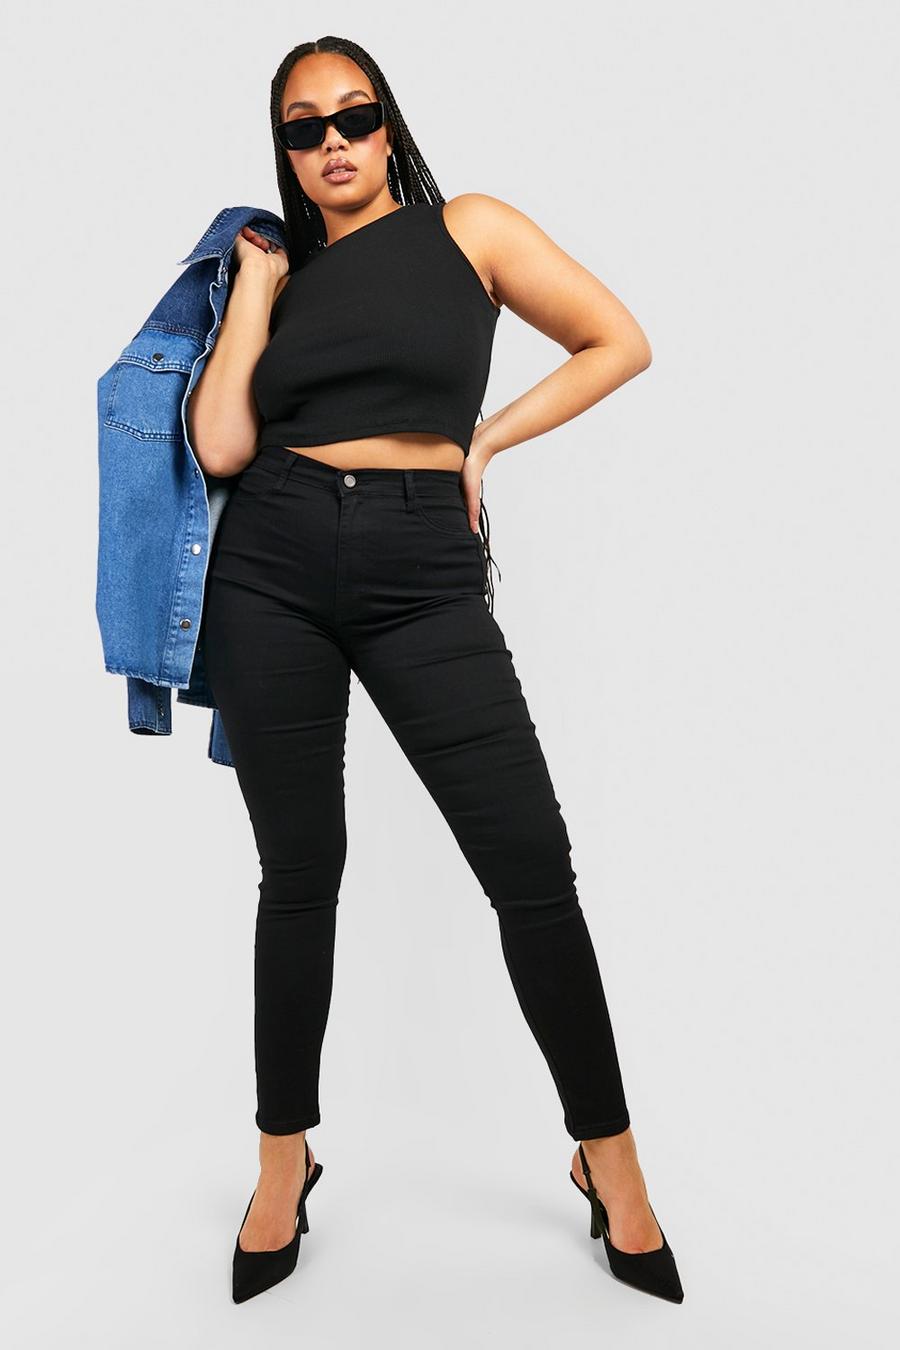 over Intrusion Compose Boohoo UK | Nude elasticated tailored knee-length shorts | Women's Plus  Super High Waisted Power Stretch Skinny Jeans